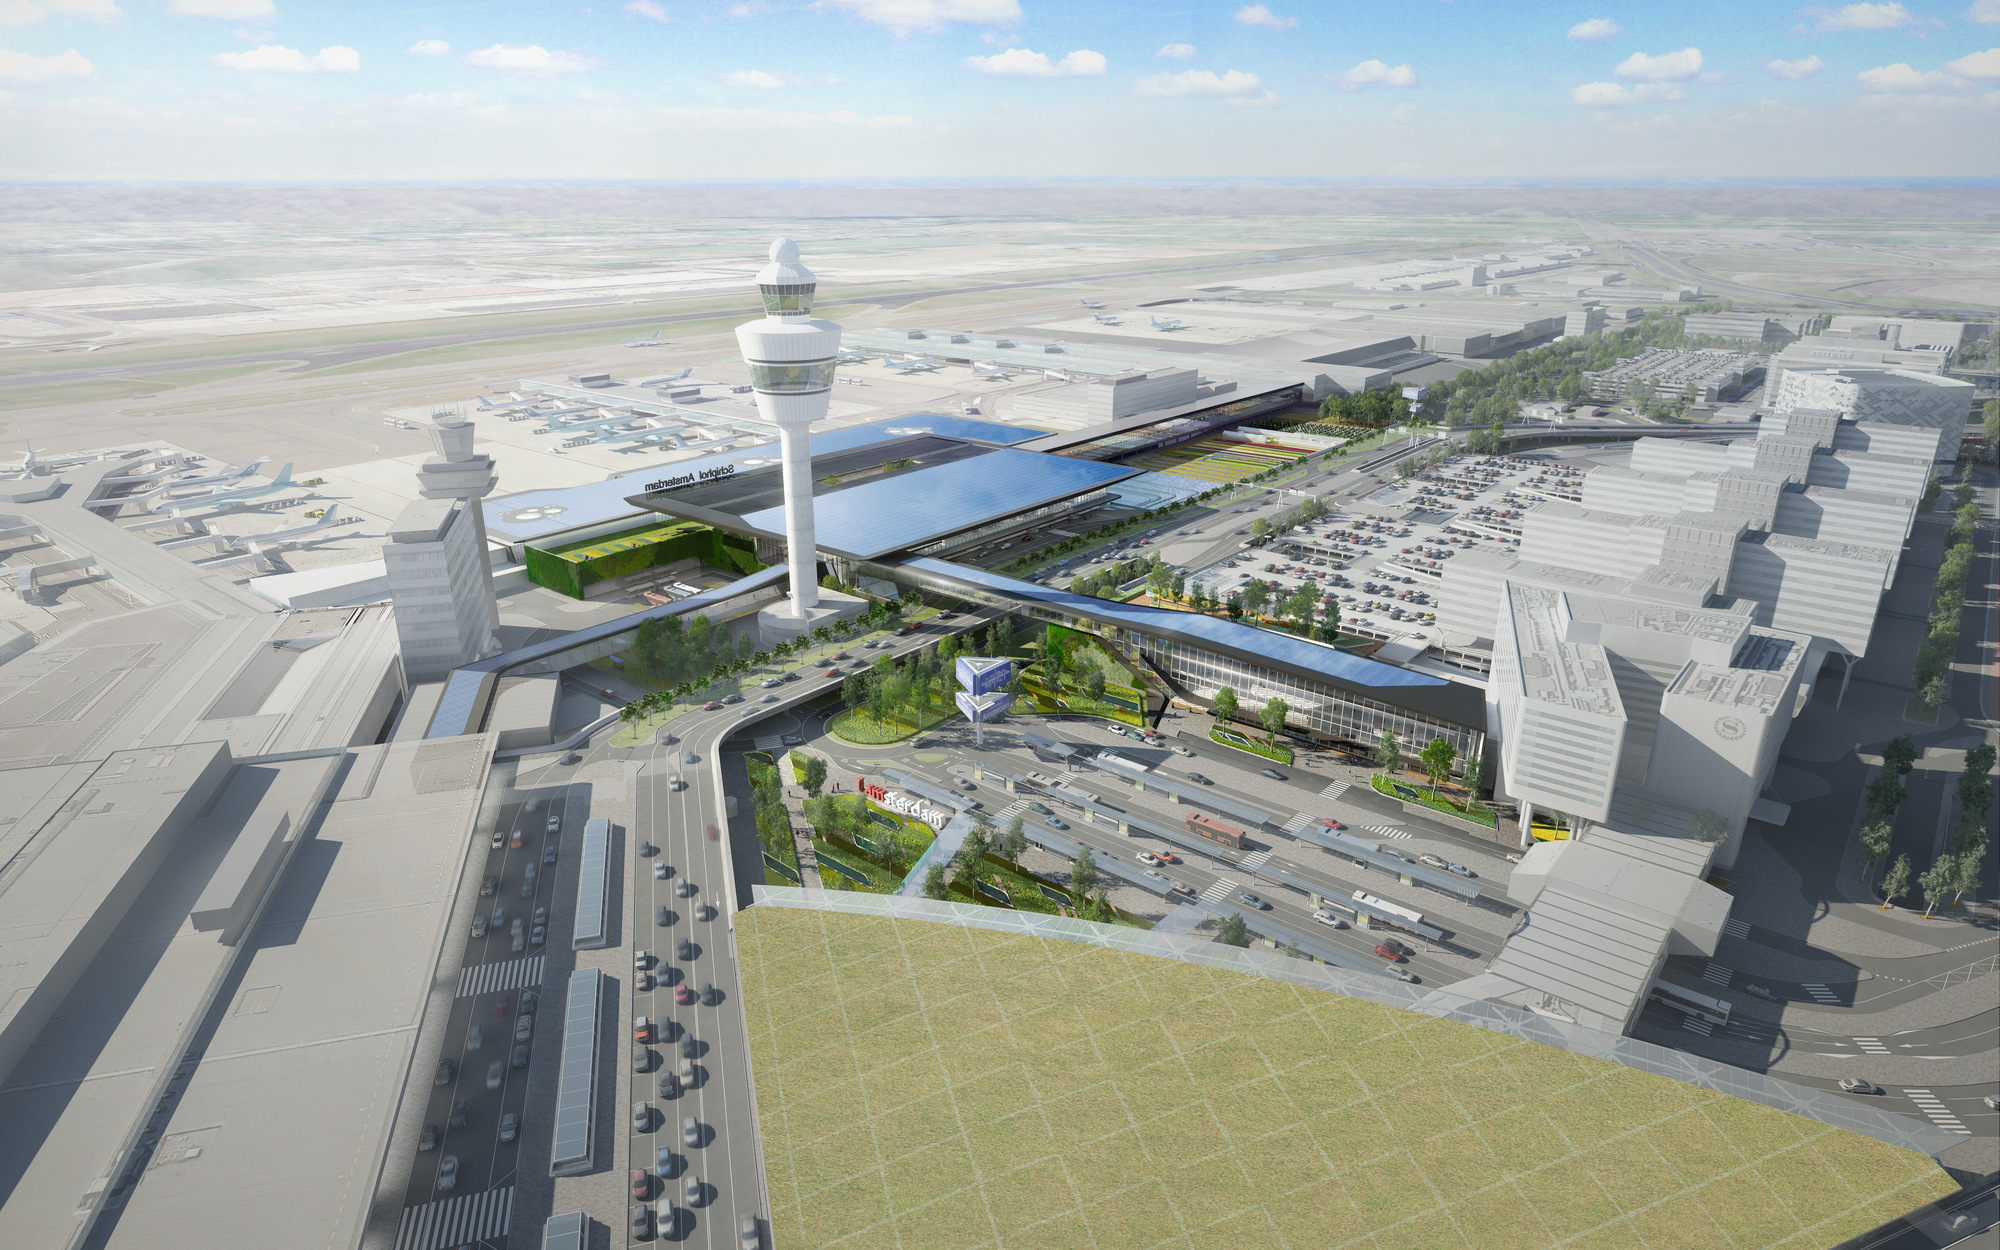 New Terminal Schiphol Airport Competition Design